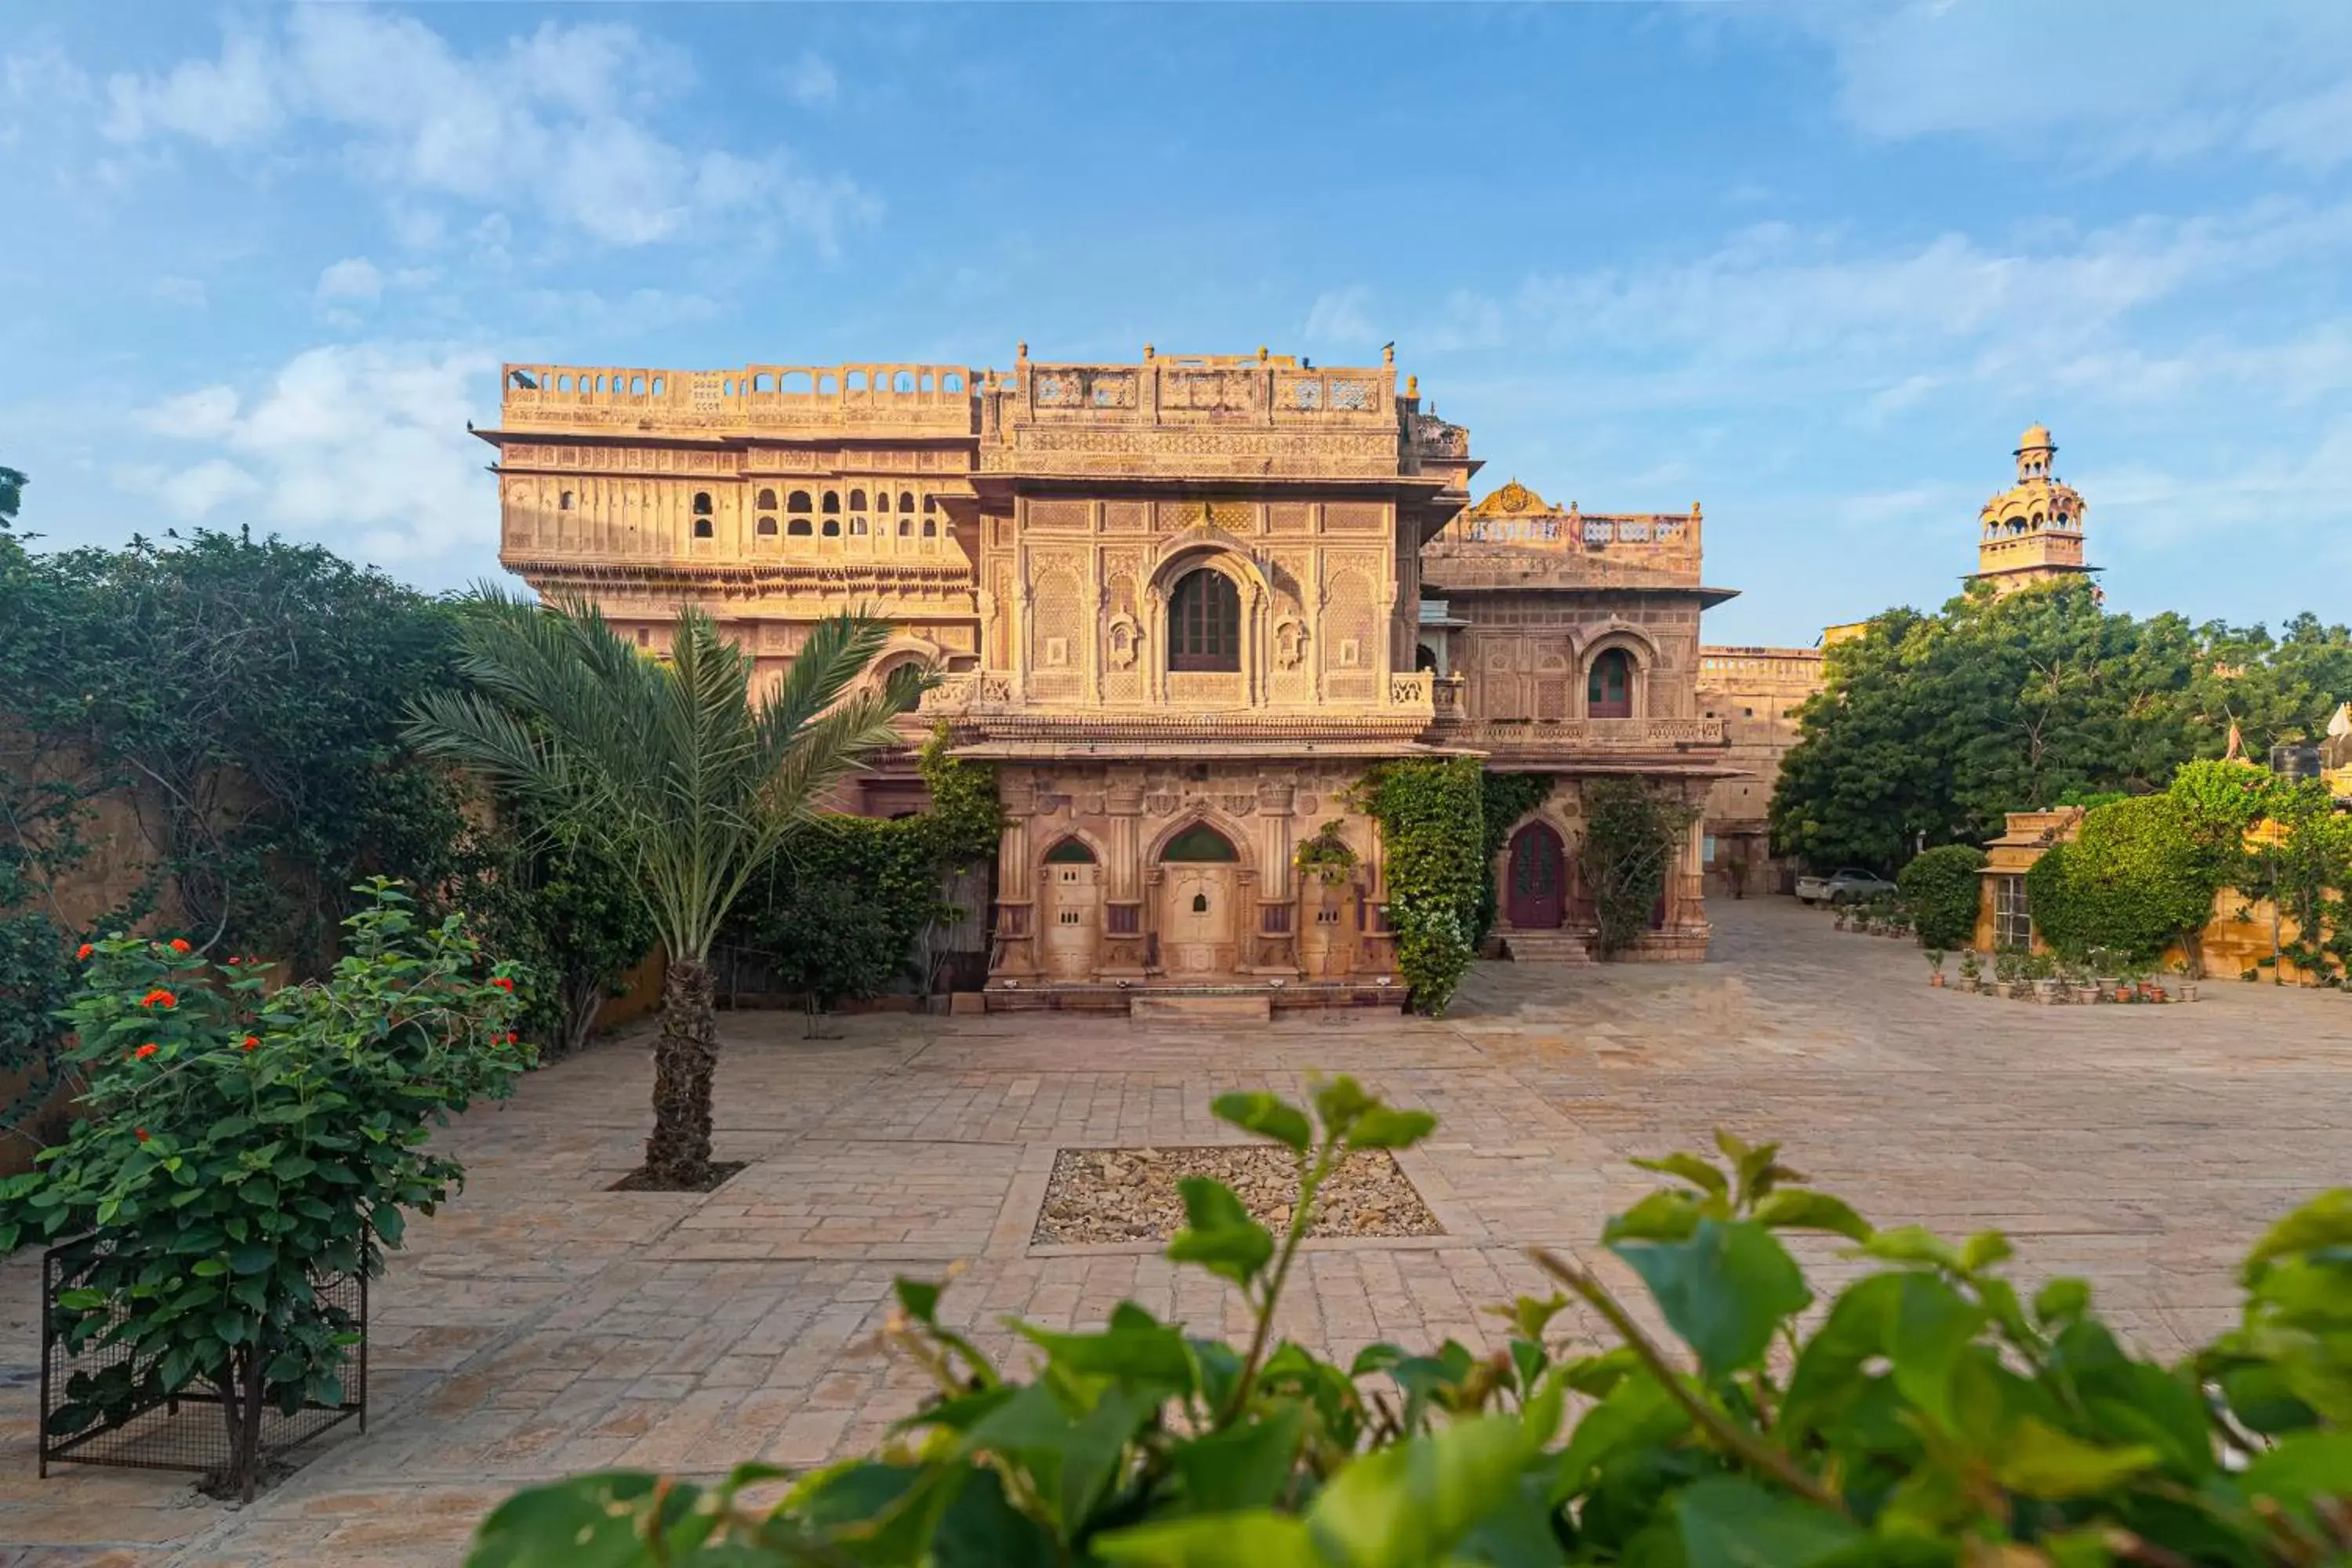 Property Building in WelcomHeritage Mandir Palace